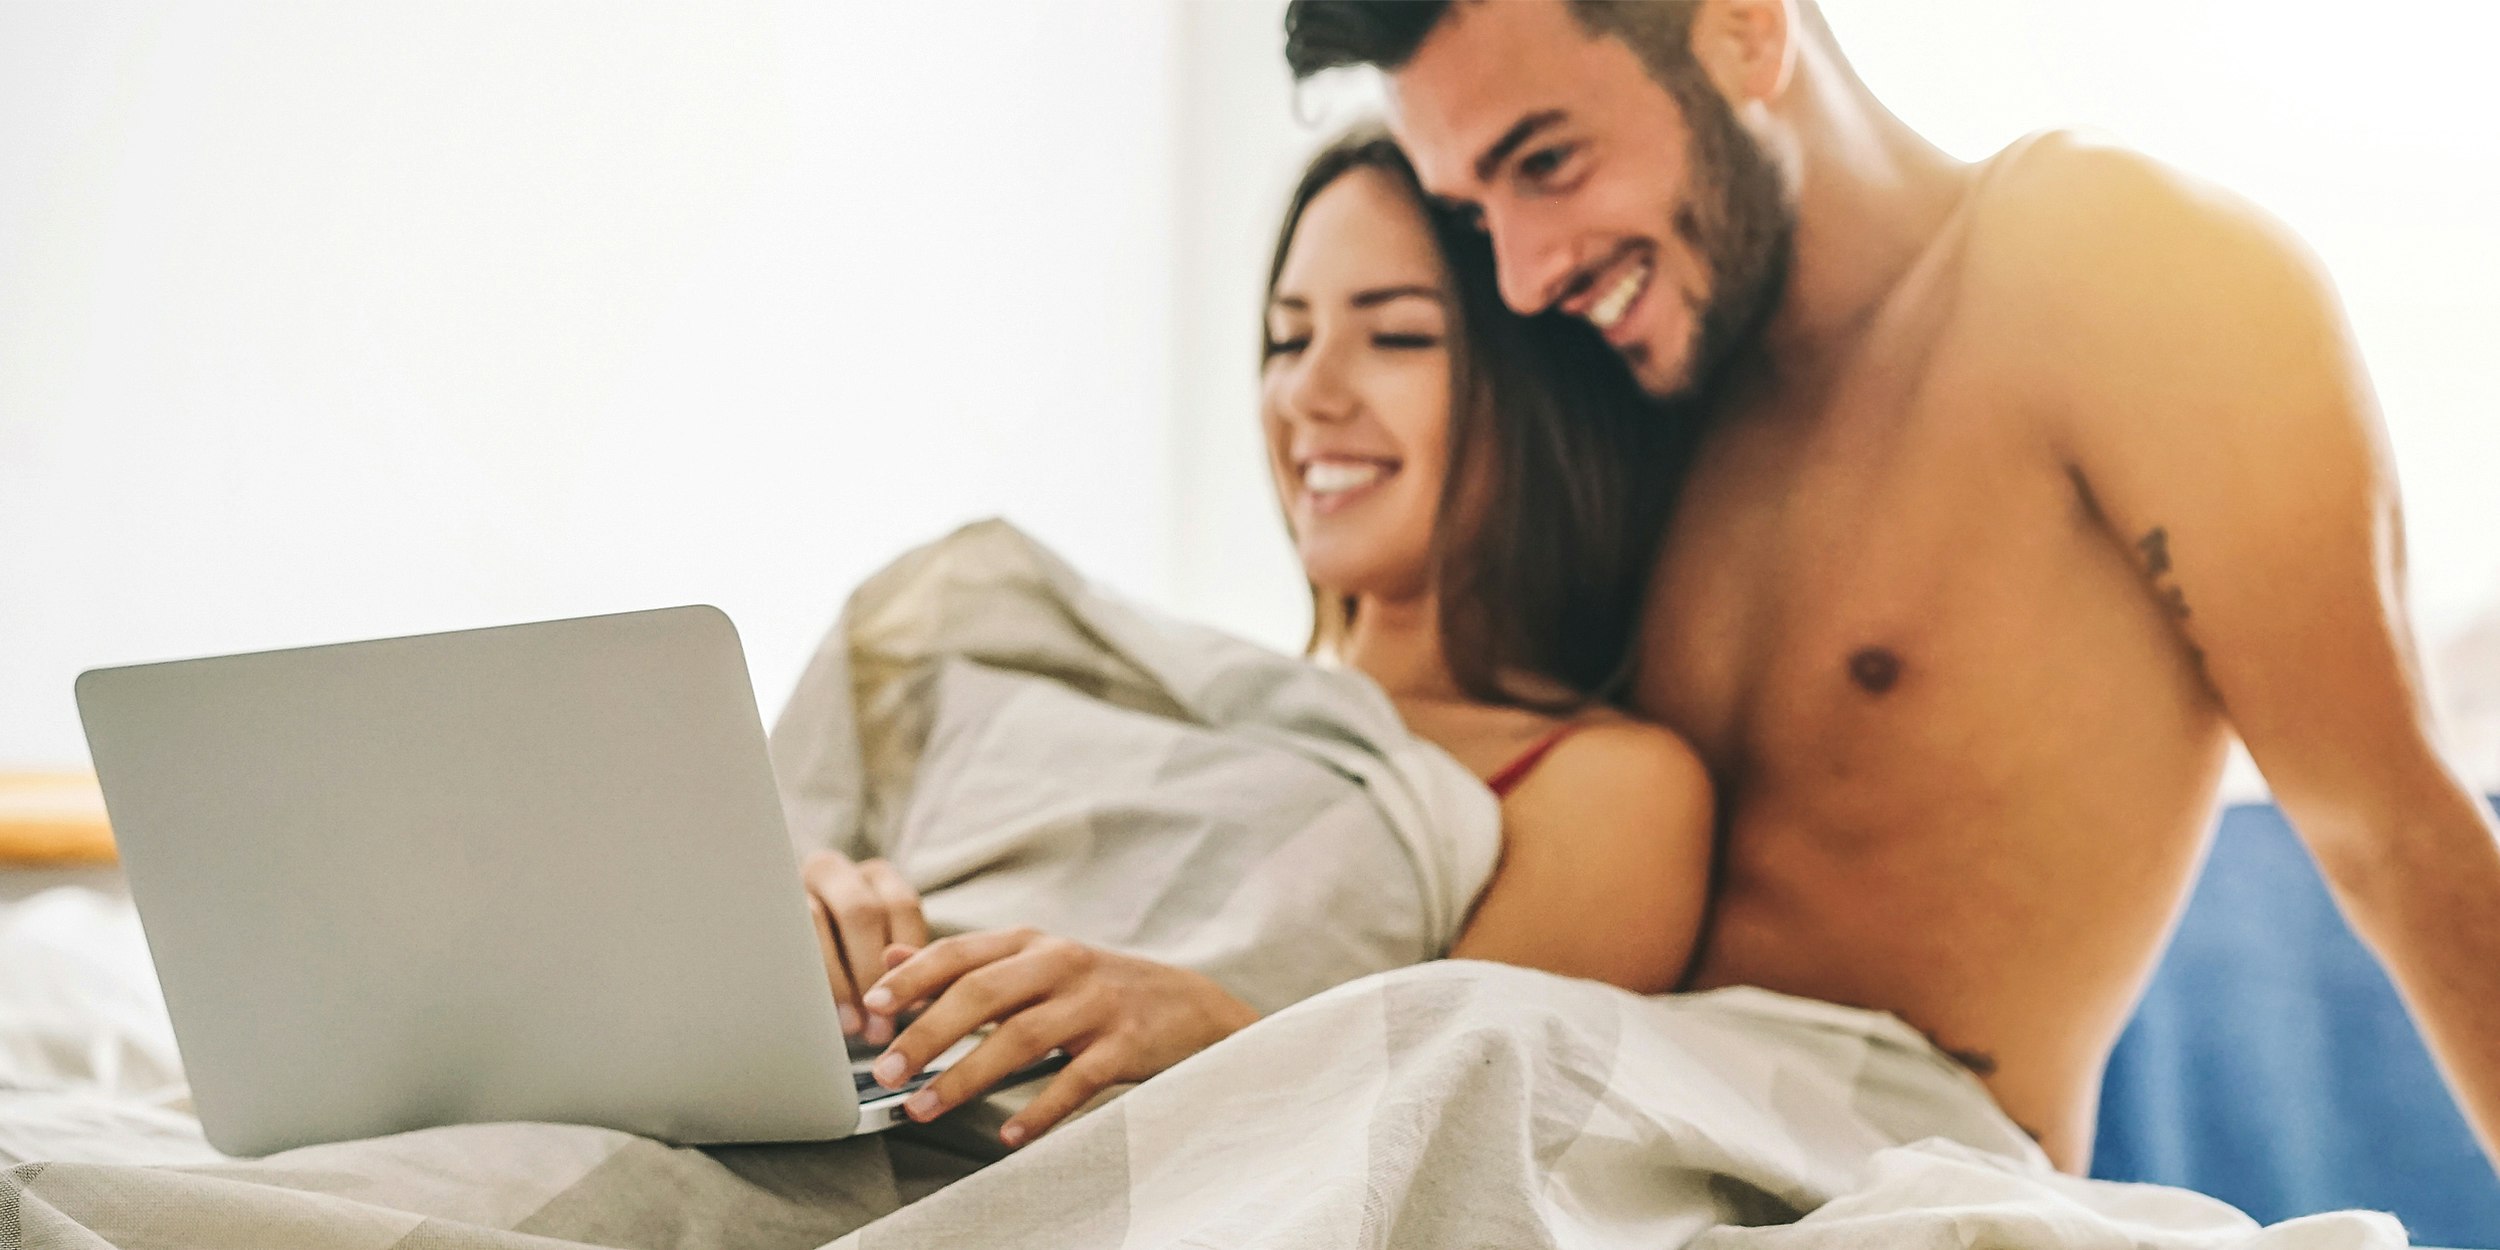 Free Porn For Couples